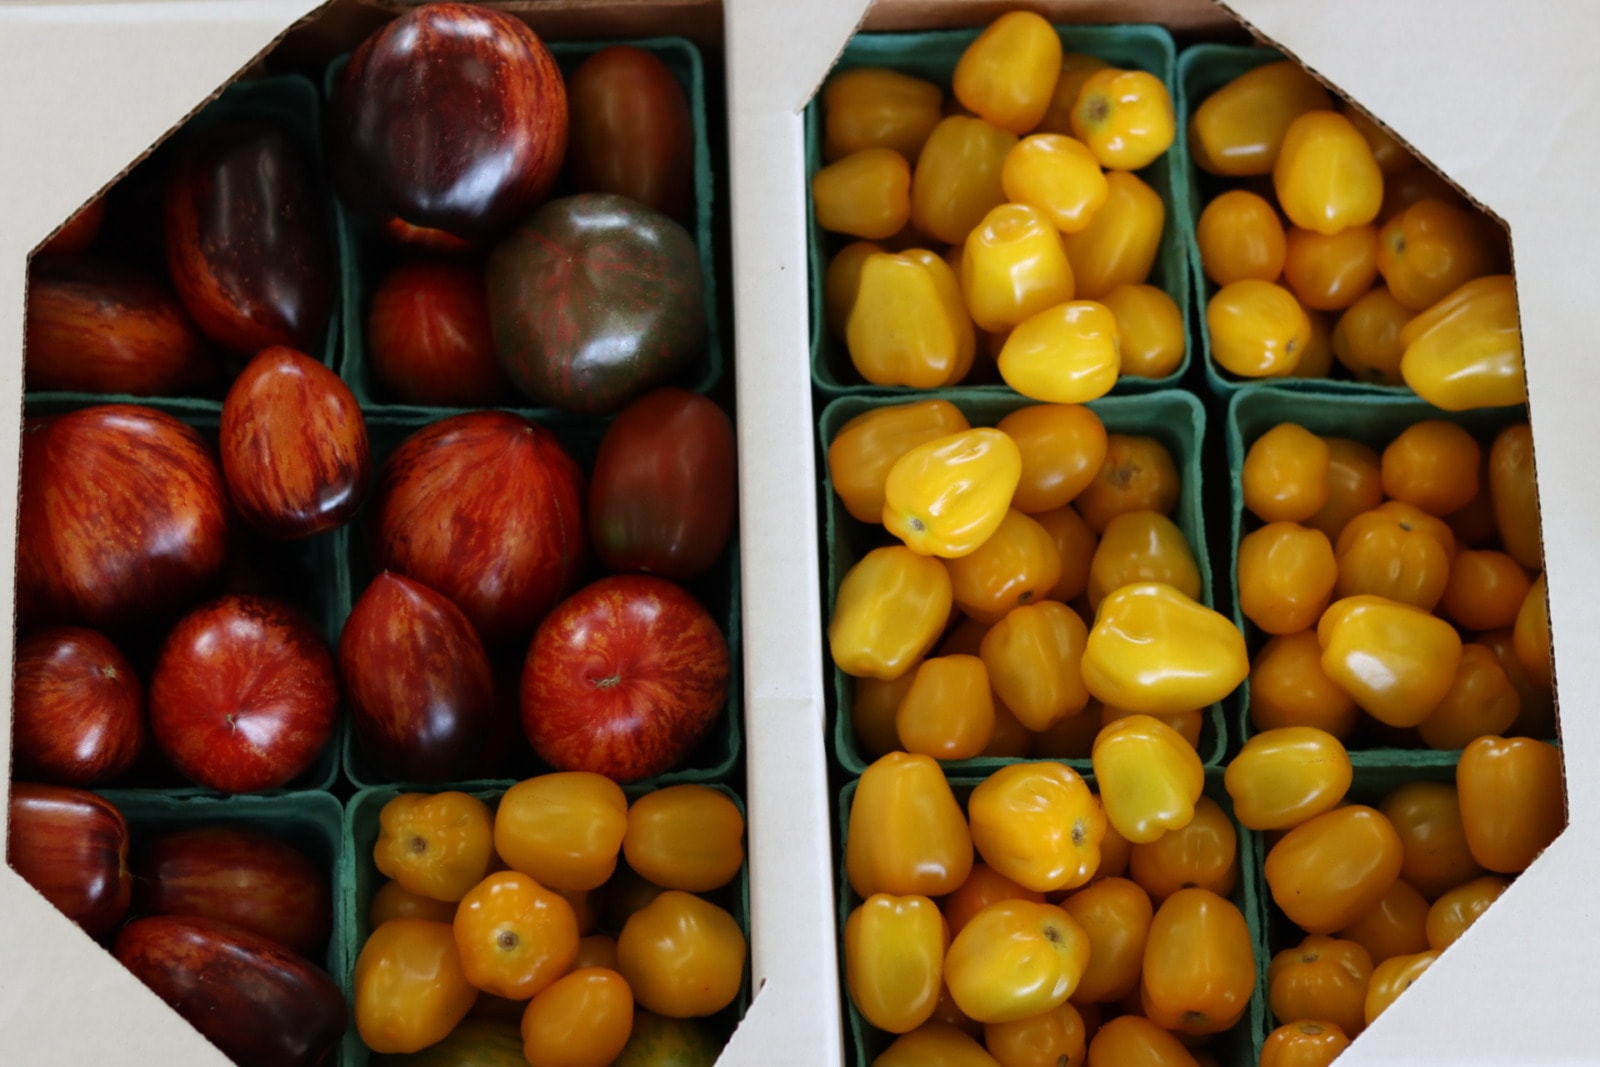 Striated, medium sized tomatoes and smaller, yellow tomatoes sit in small quart sized boxes.